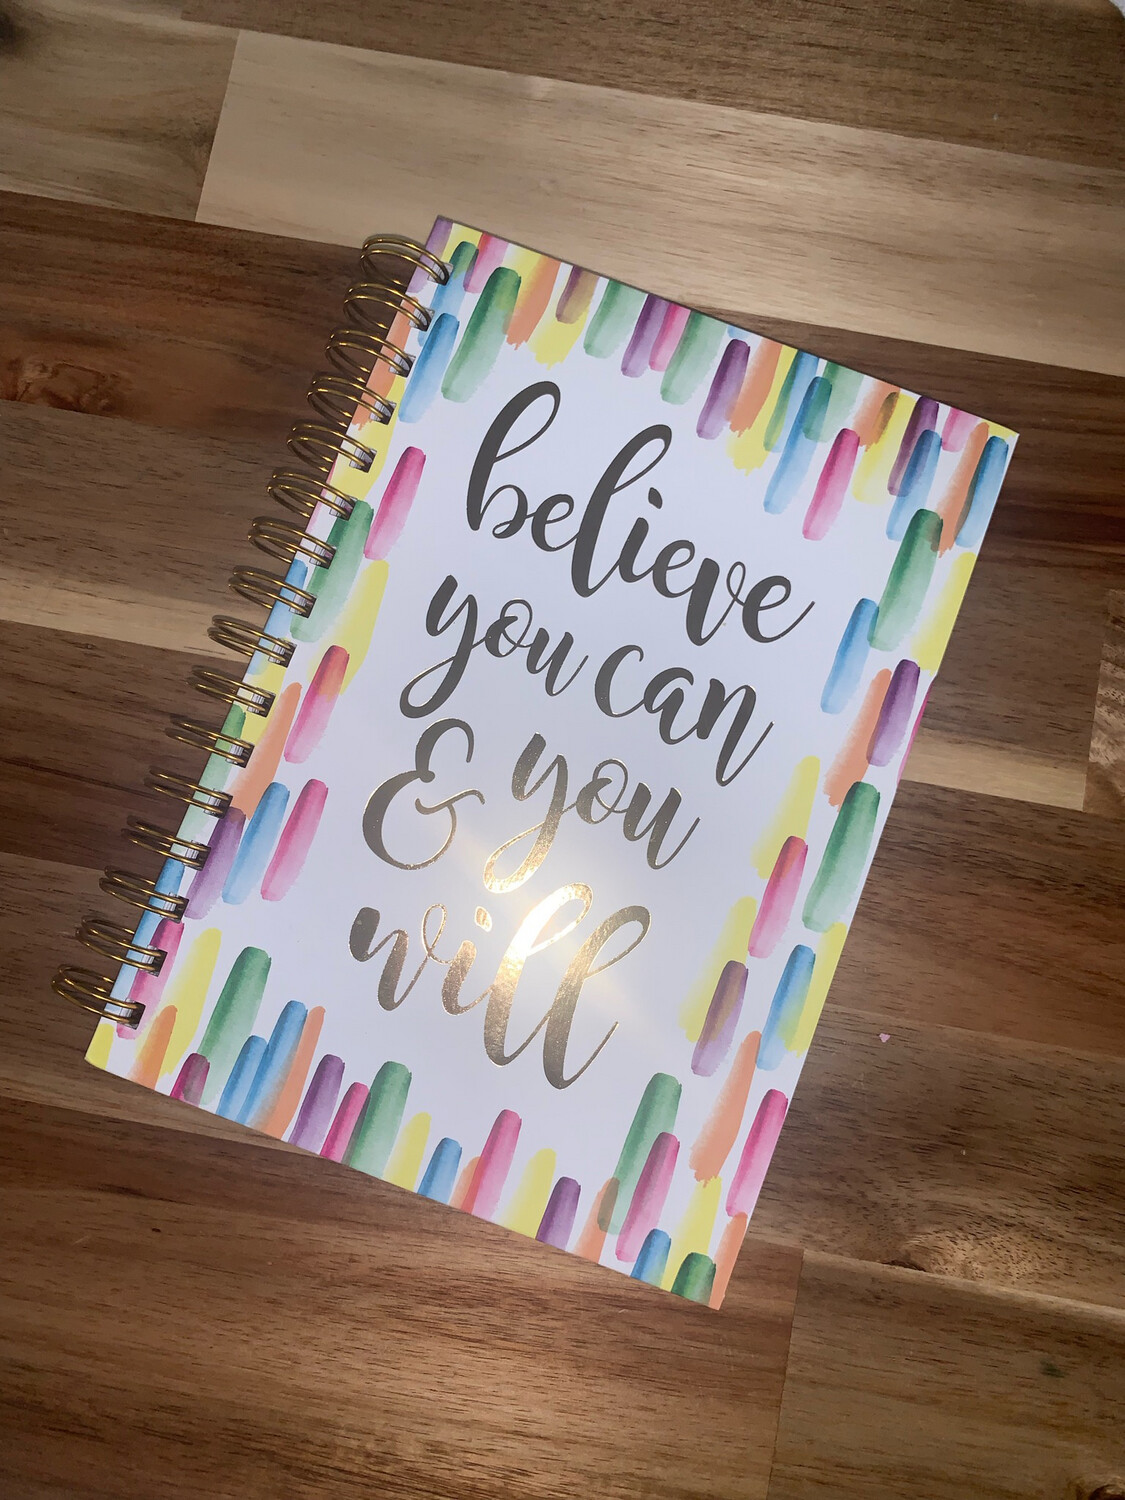 Believe You Can Journal